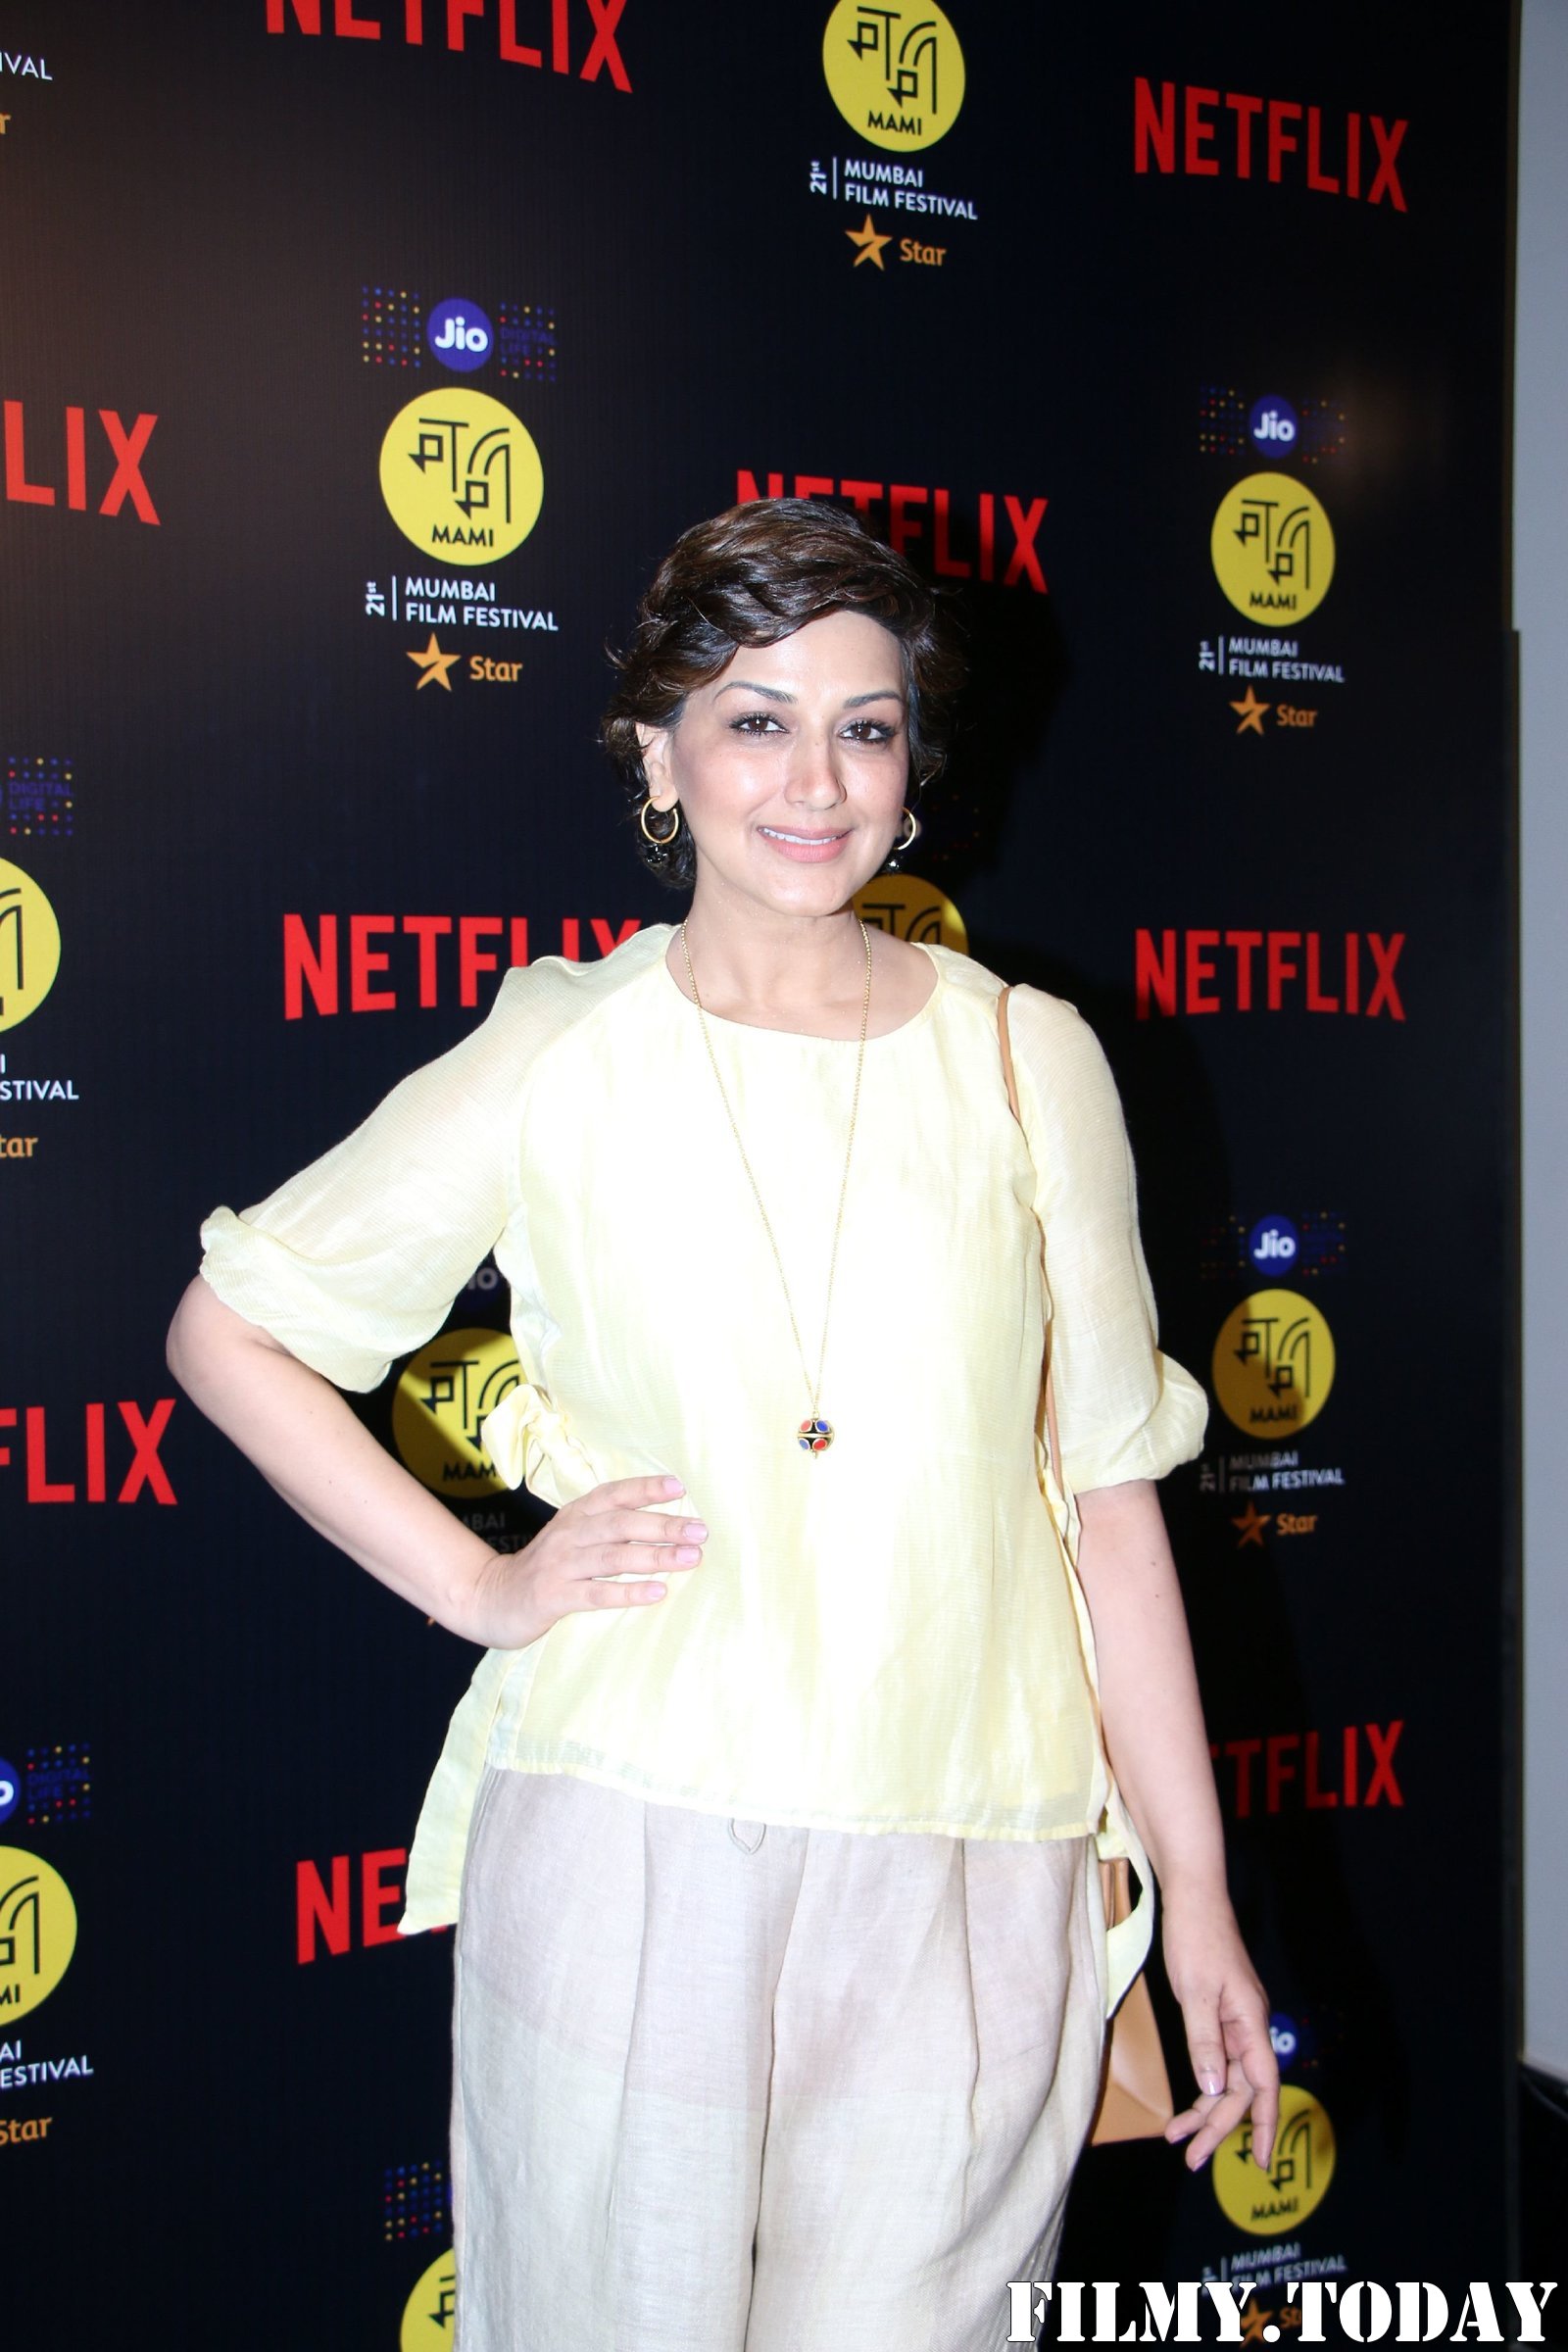 Sonali Bendre - Photos: Women In Films Celebrations By Netflix At Mami Film Festival 2019 | Picture 1693374